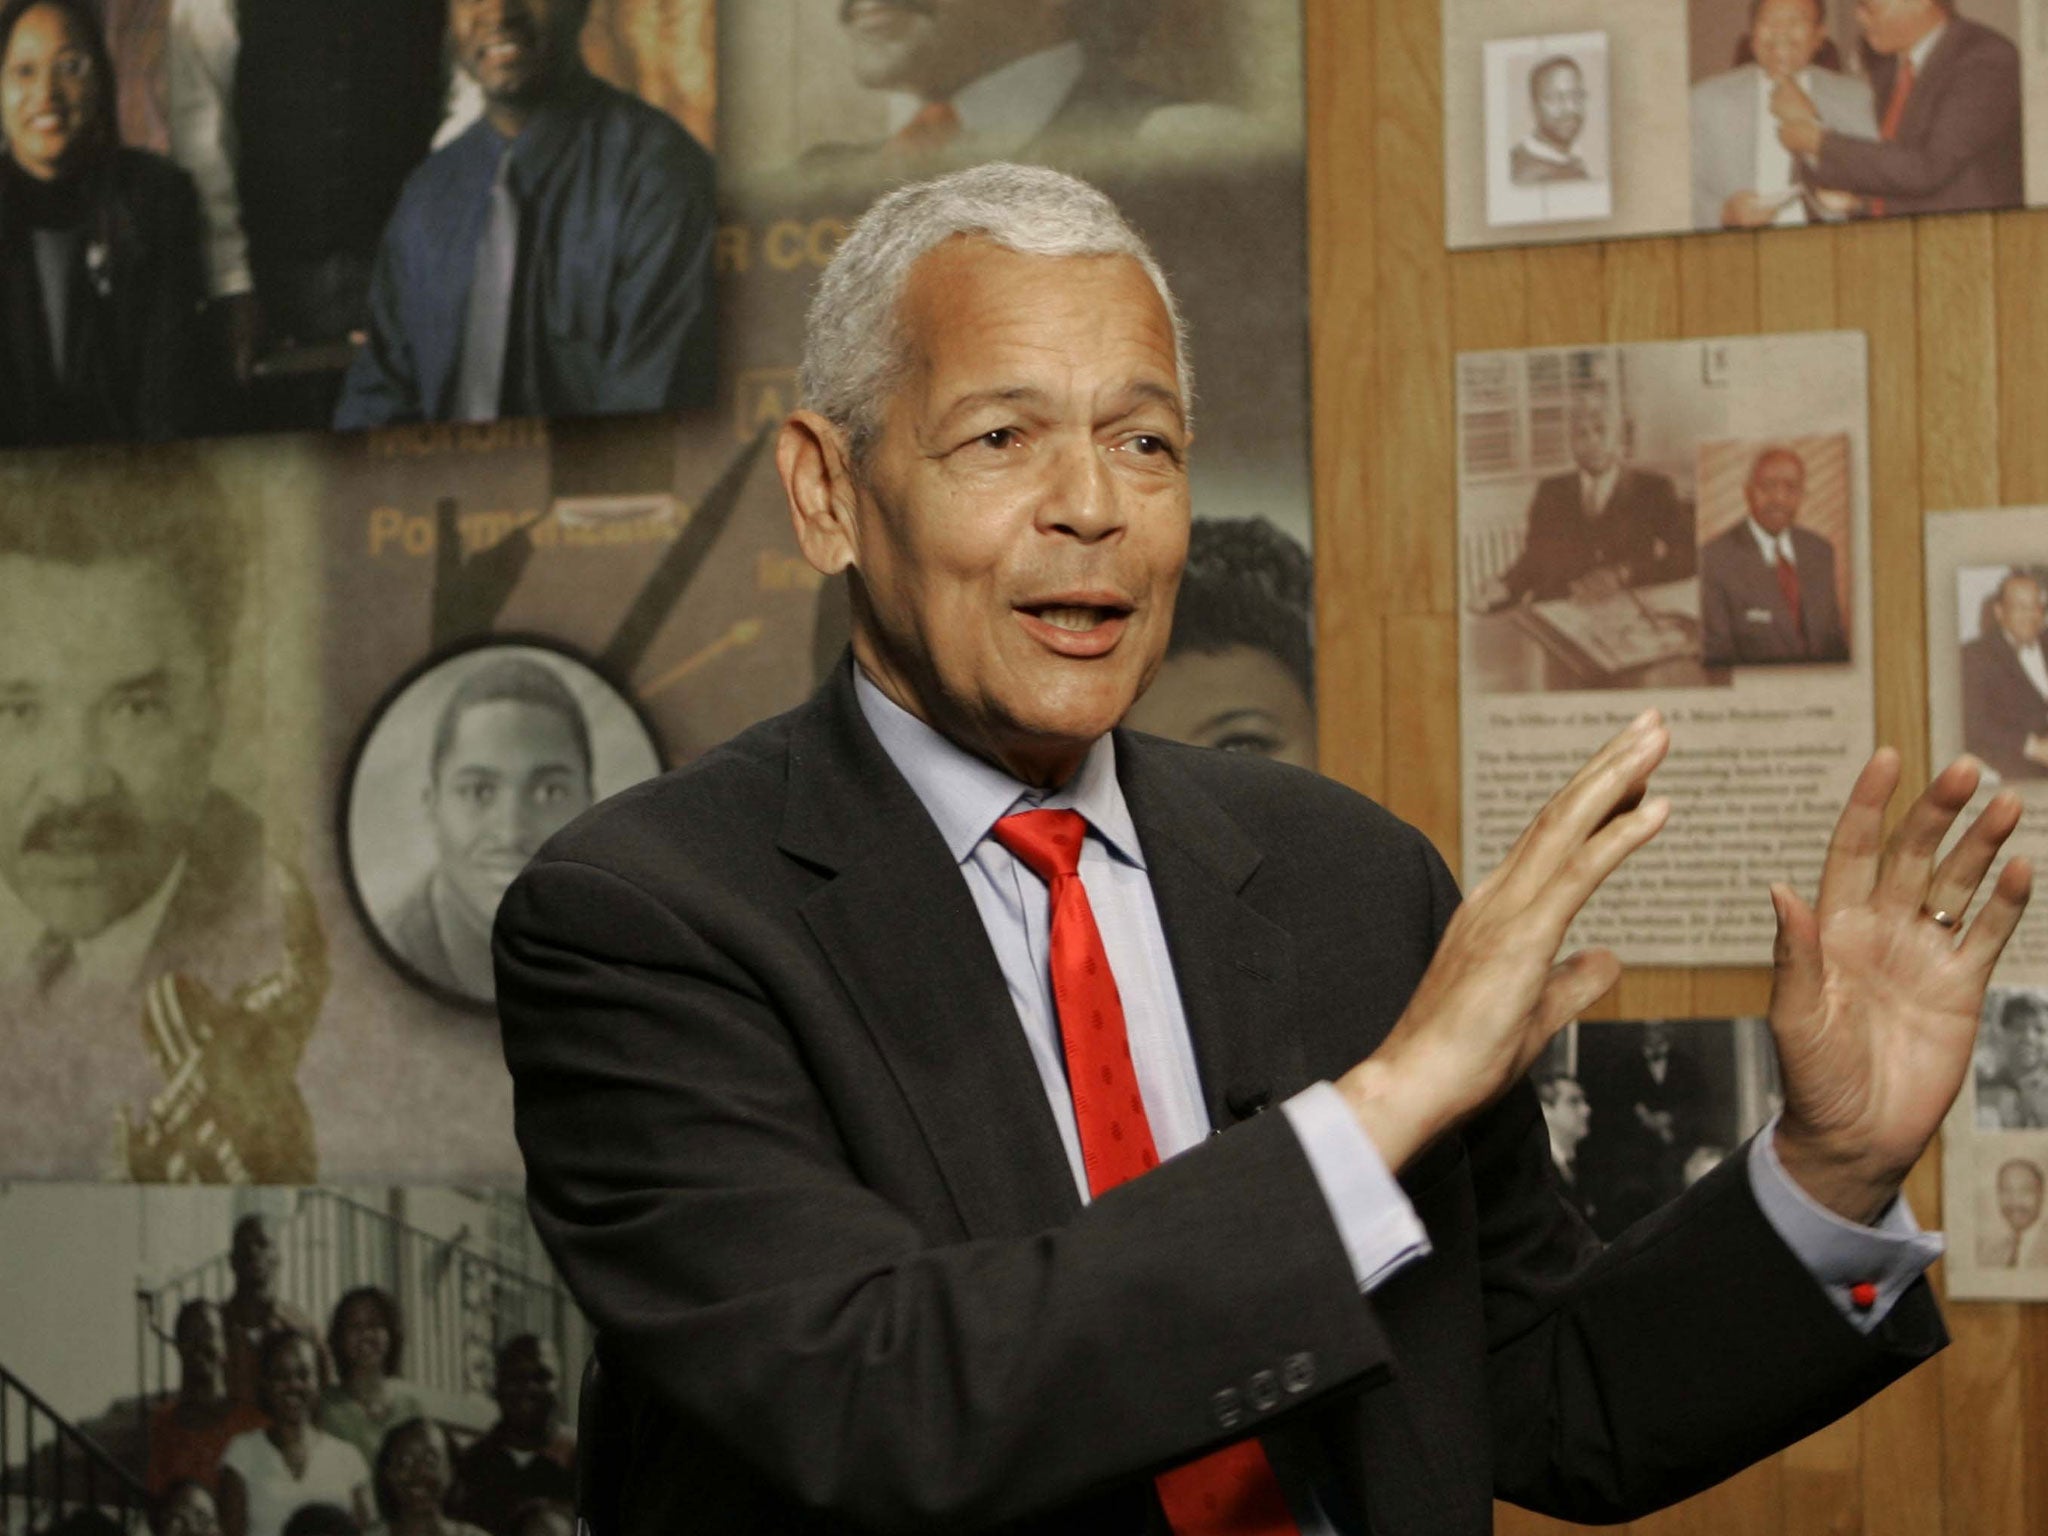 Julian Bond, chairman of the Board for The National Association for the Advancement of Colored People, has died.